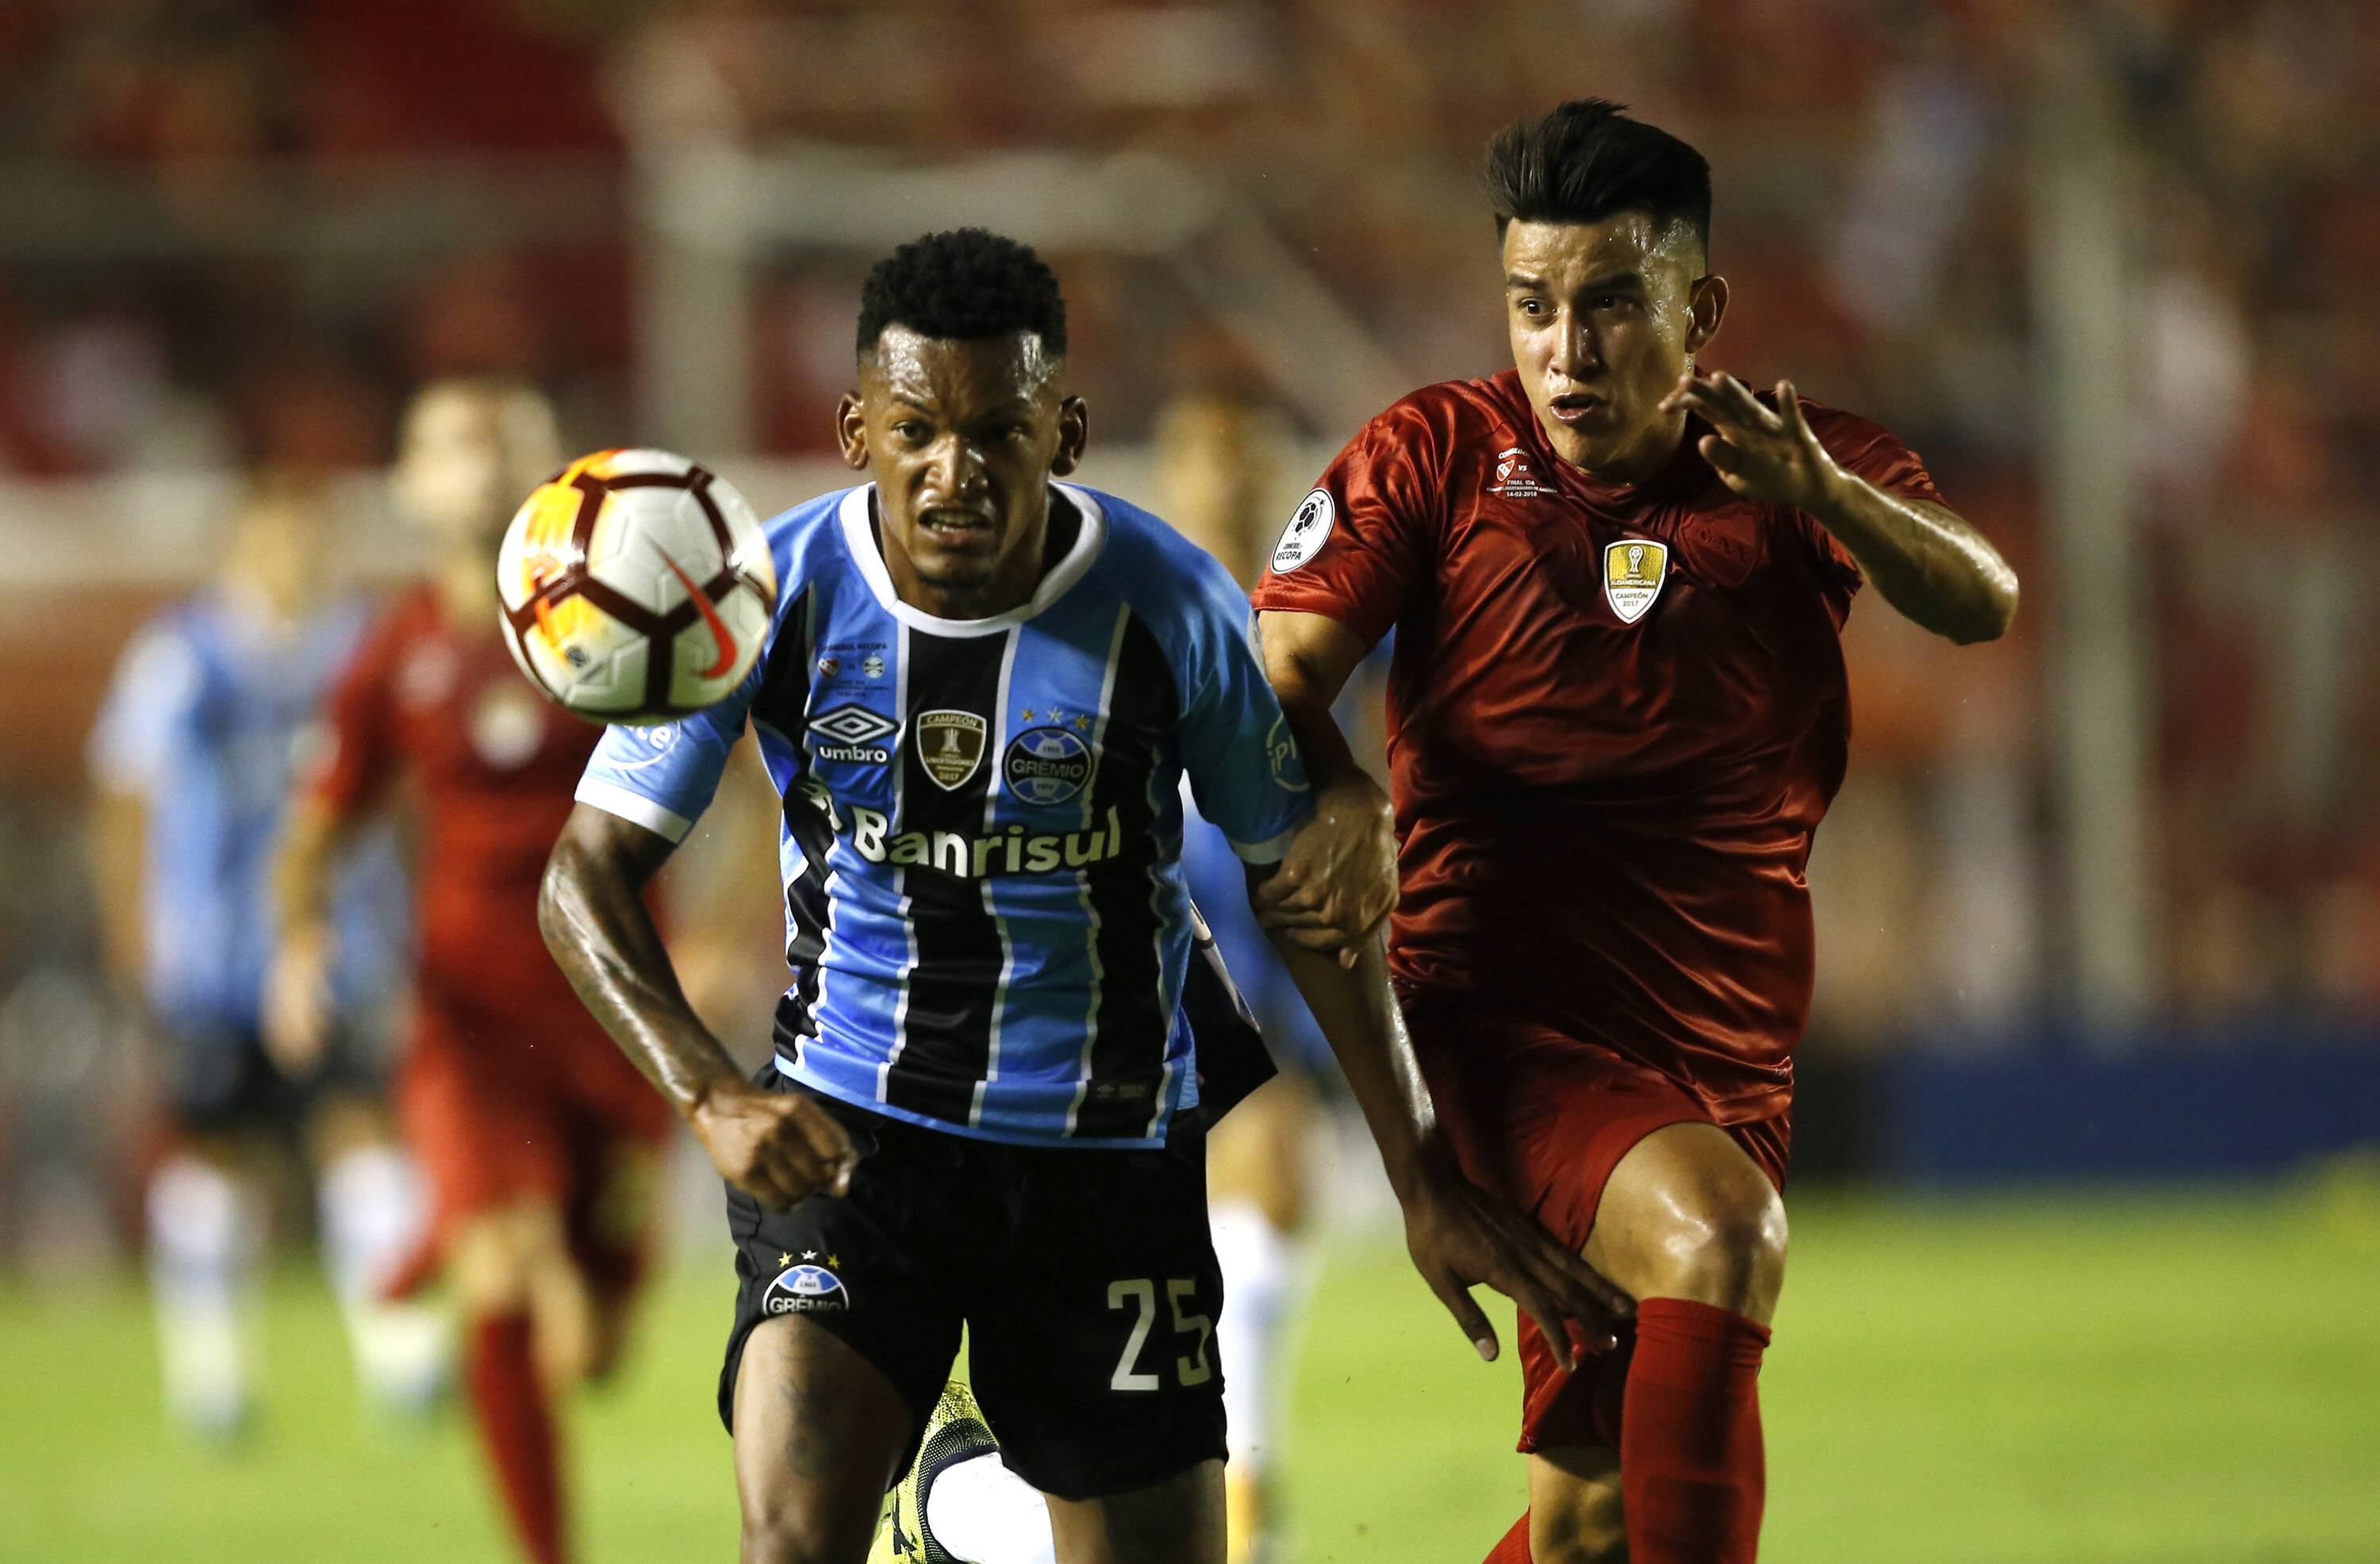 Independiente S Fernando Gaibor R Vies For The Goal Against Jailson L Of Gremio During The Recop